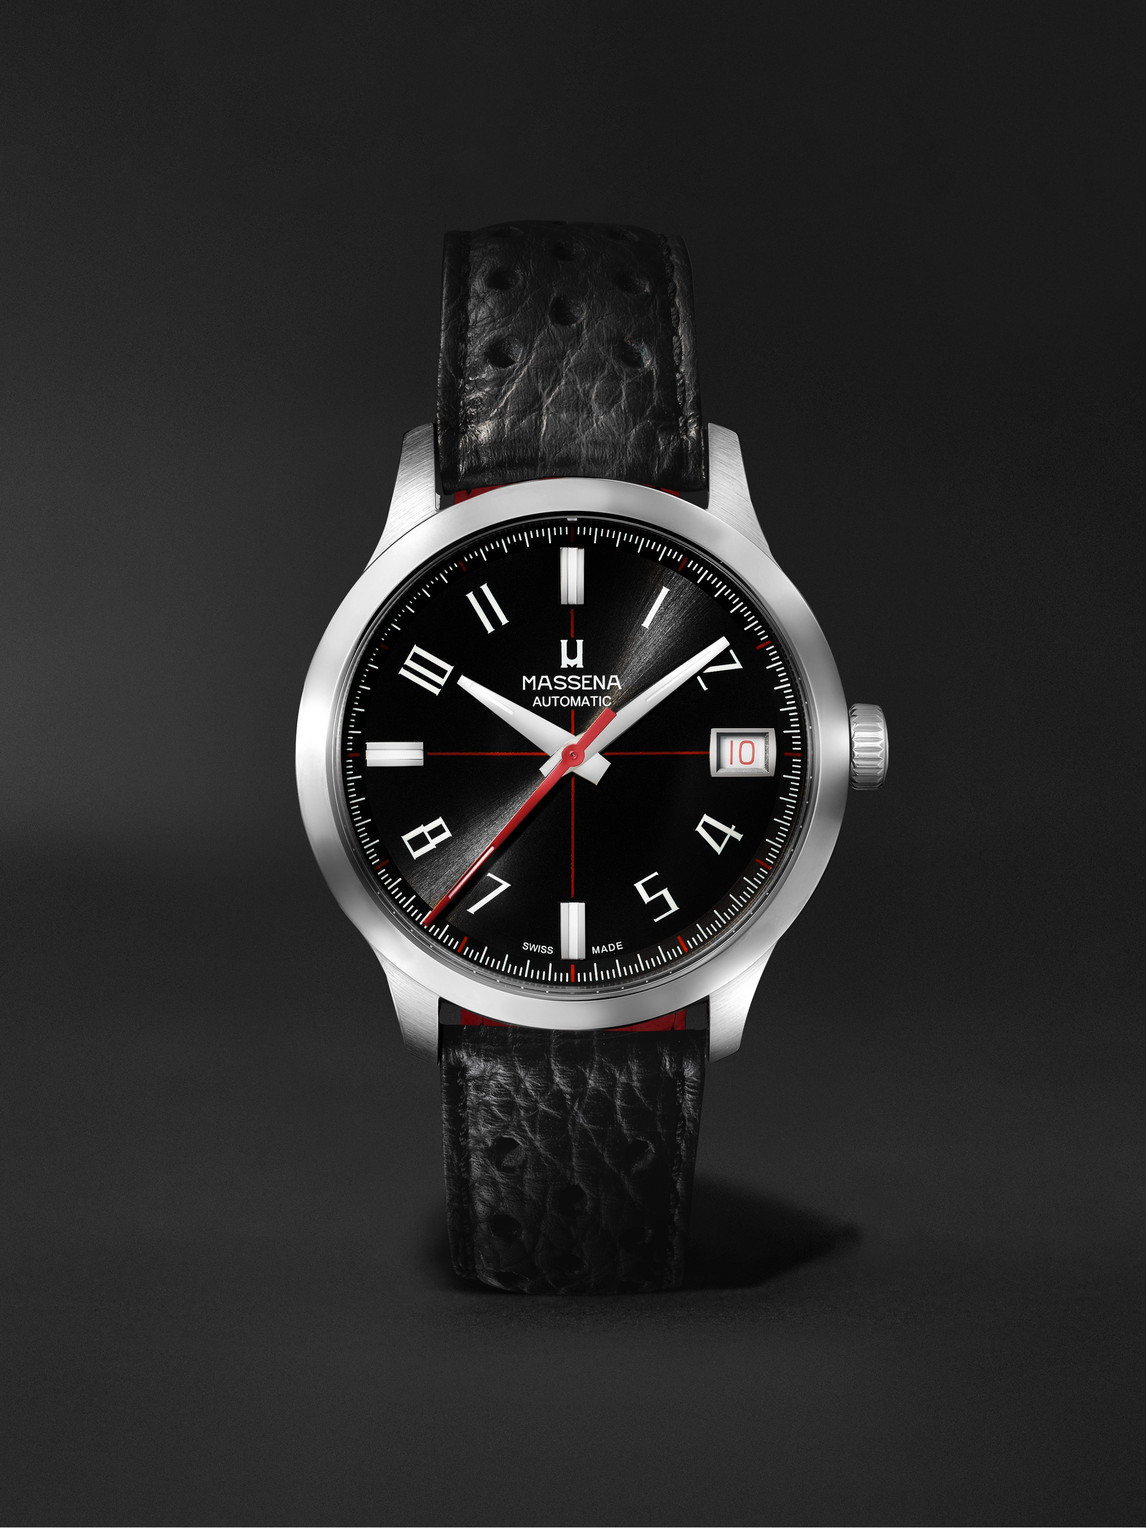 Massena Lab Dato-racer Limited Edition Automatic 40mm Stainless Steel And Full-grain Leather Watch, Ref. No. Dr- In Black